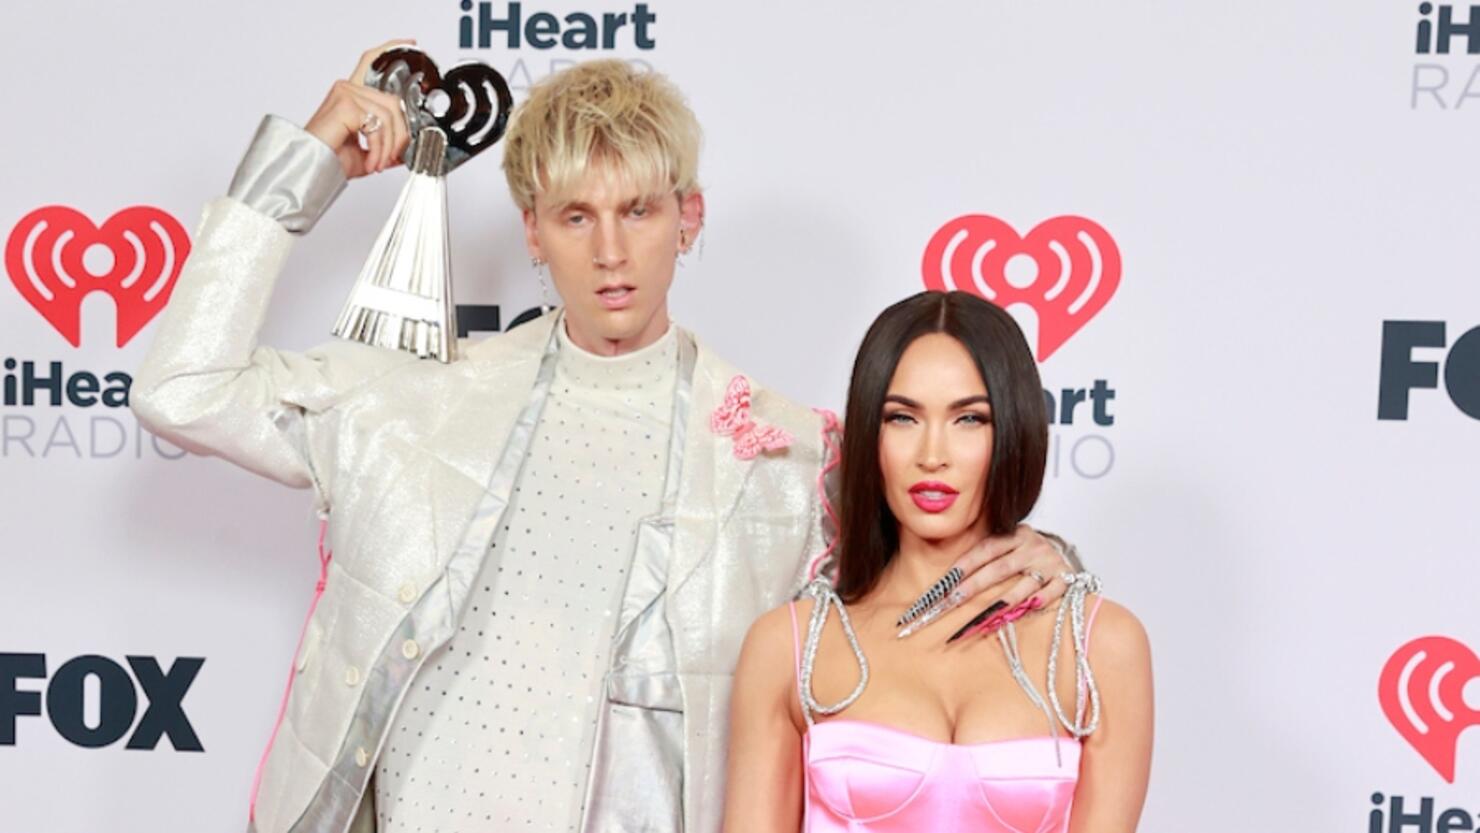 2021 iHeartRadio Music Awards: See The Full List of Nominees